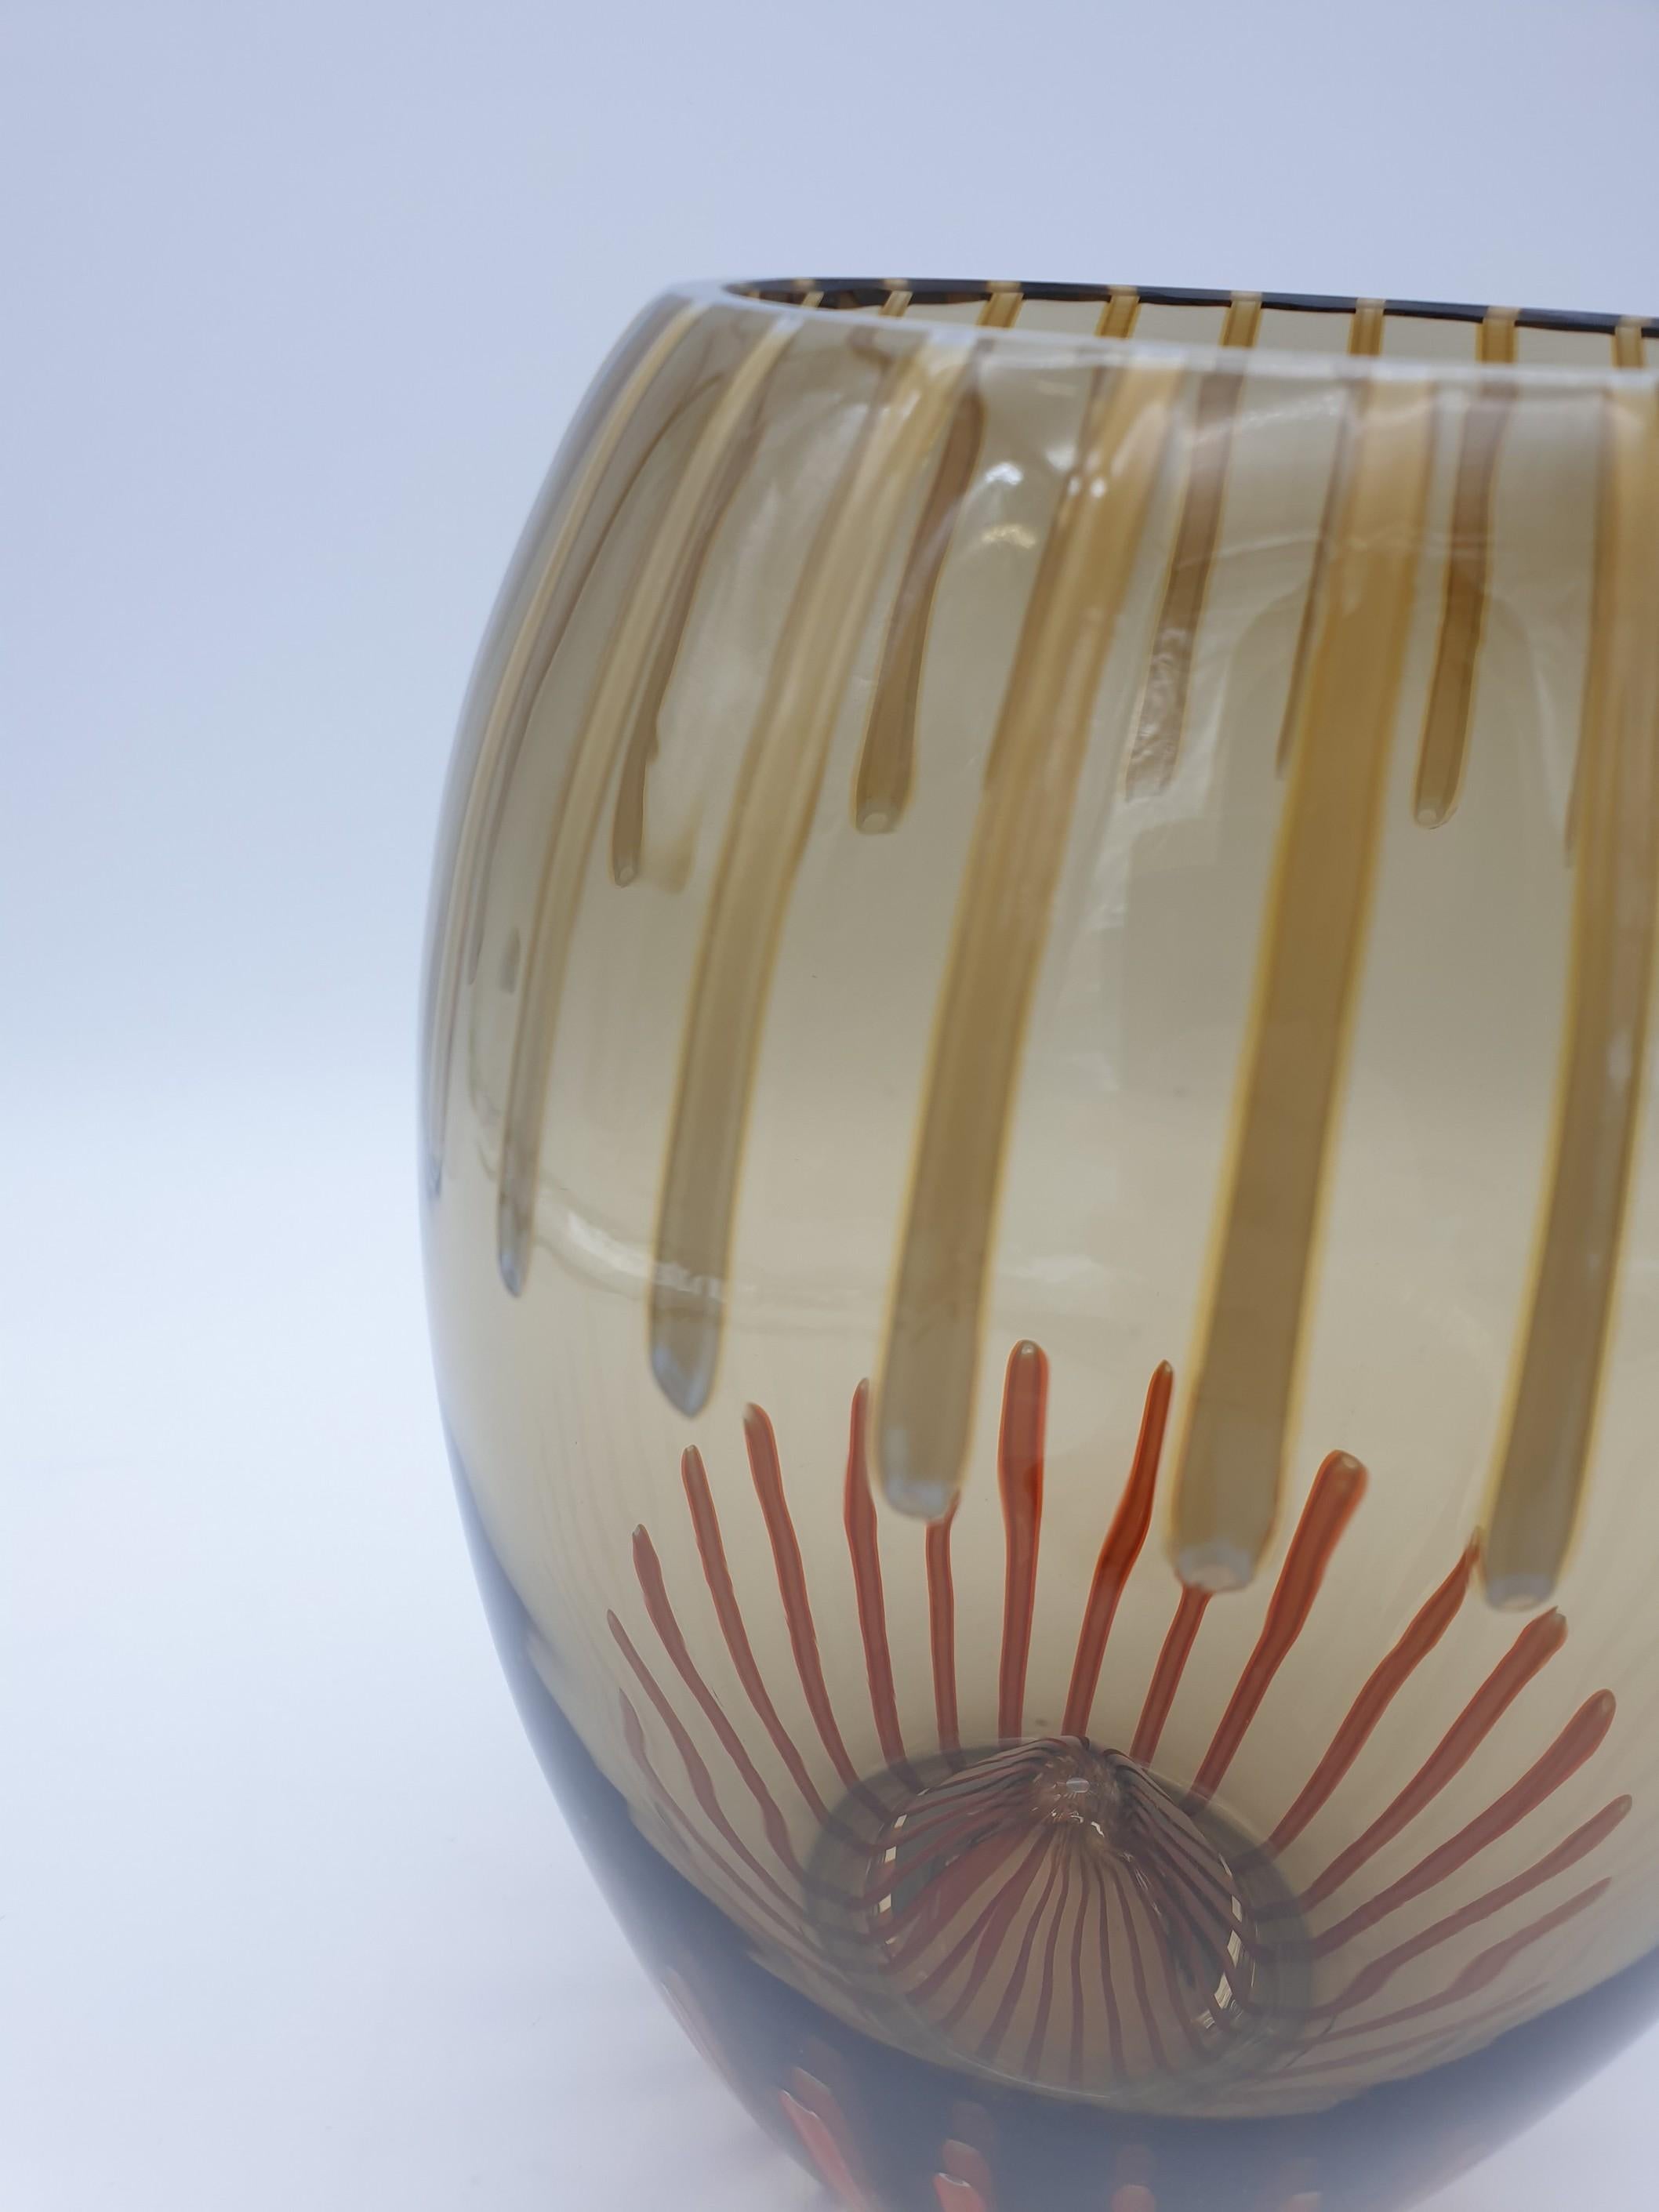 Murano Glass Modern Coffee Color / Brownish Murano-Glass Vase by Gino Cenedese, late 1990s For Sale